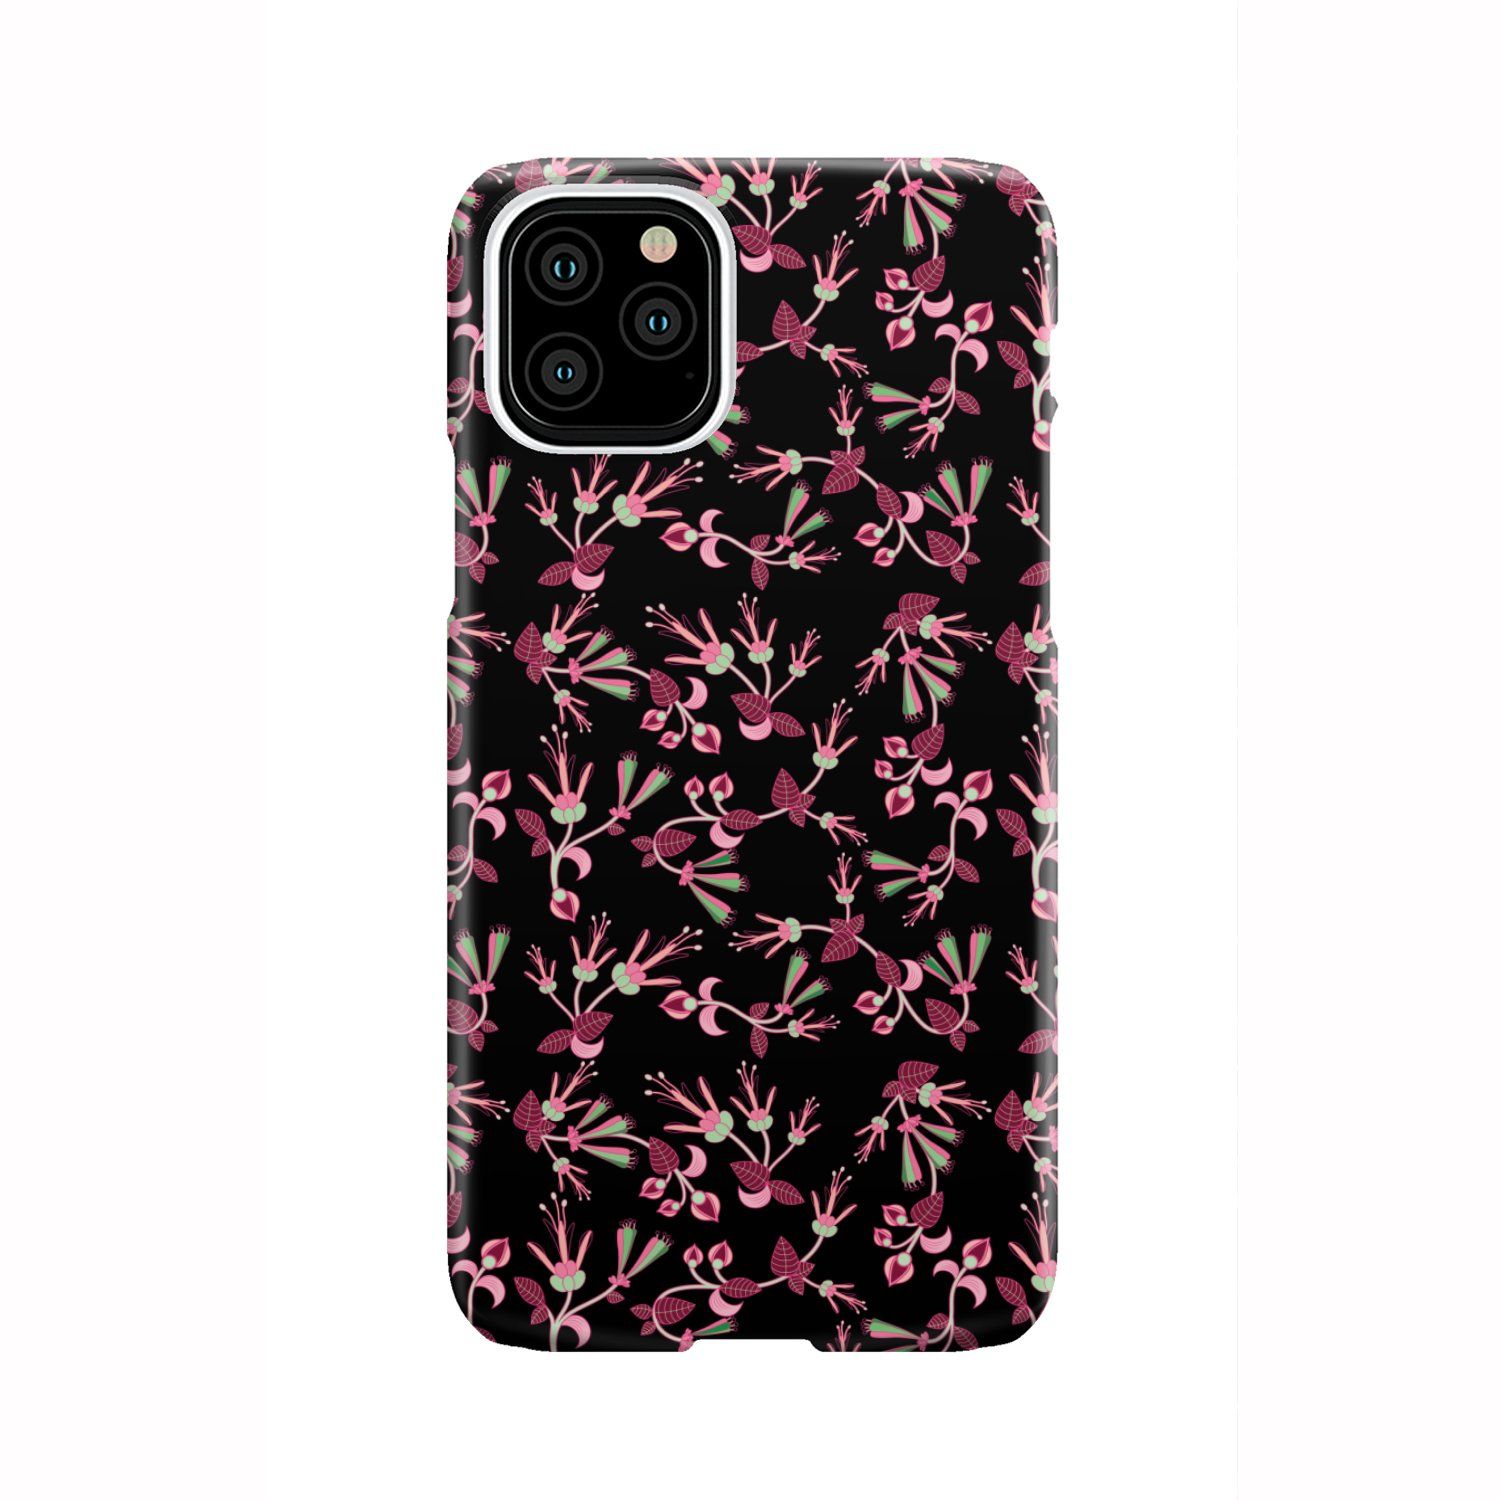 Floral Green Black Phone Case Phone Case wc-fulfillment iPhone 11 Pro 